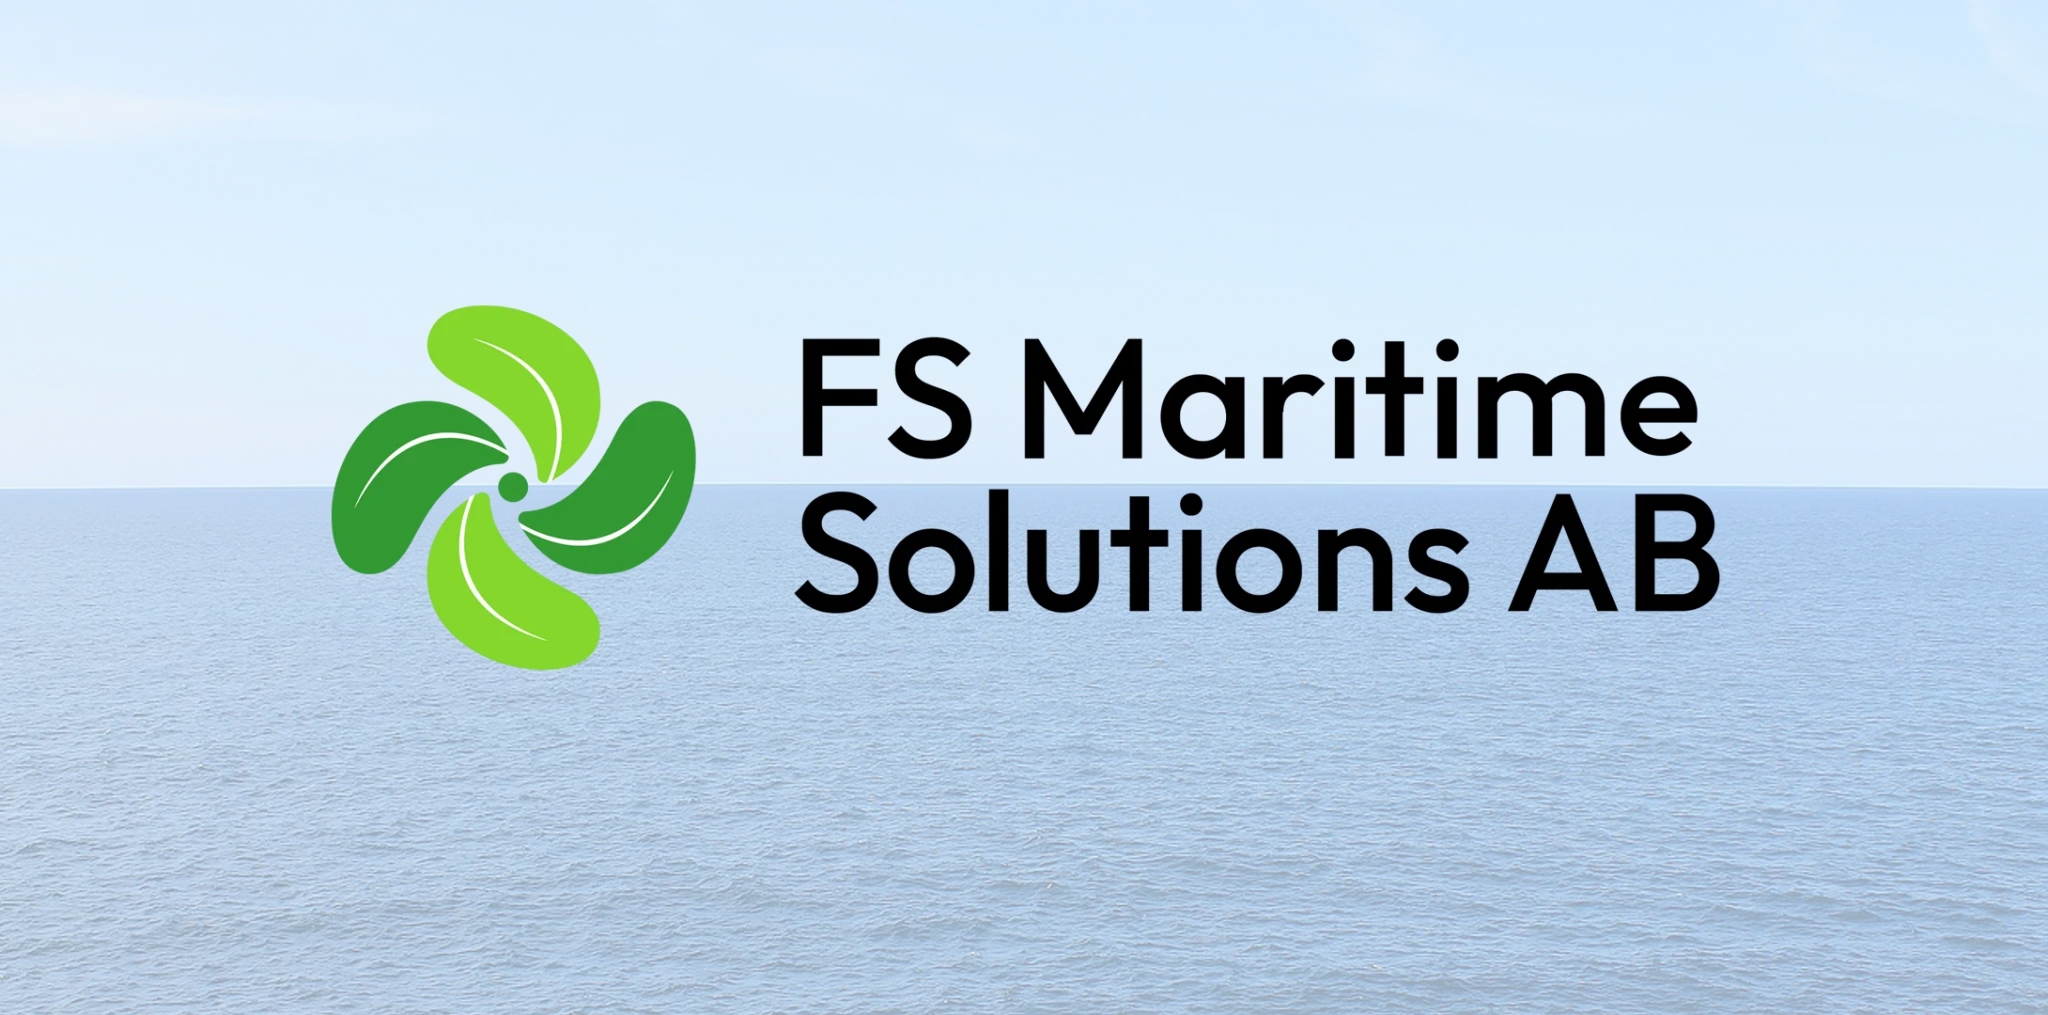 FS Maritime Solutions AB